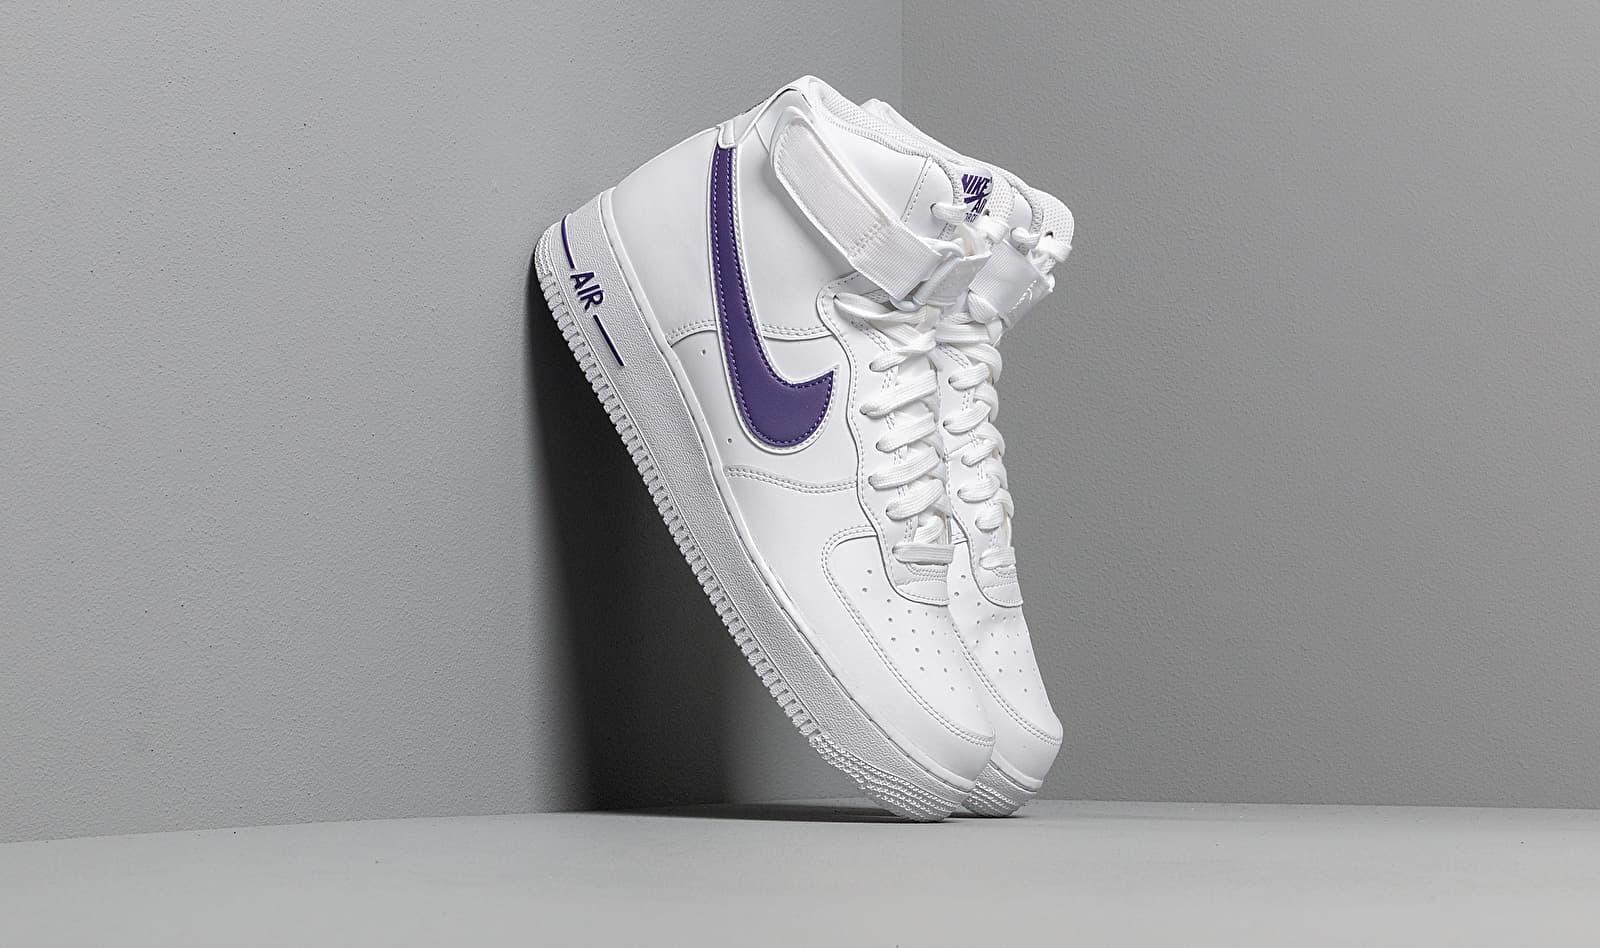 purple and white high top air force ones